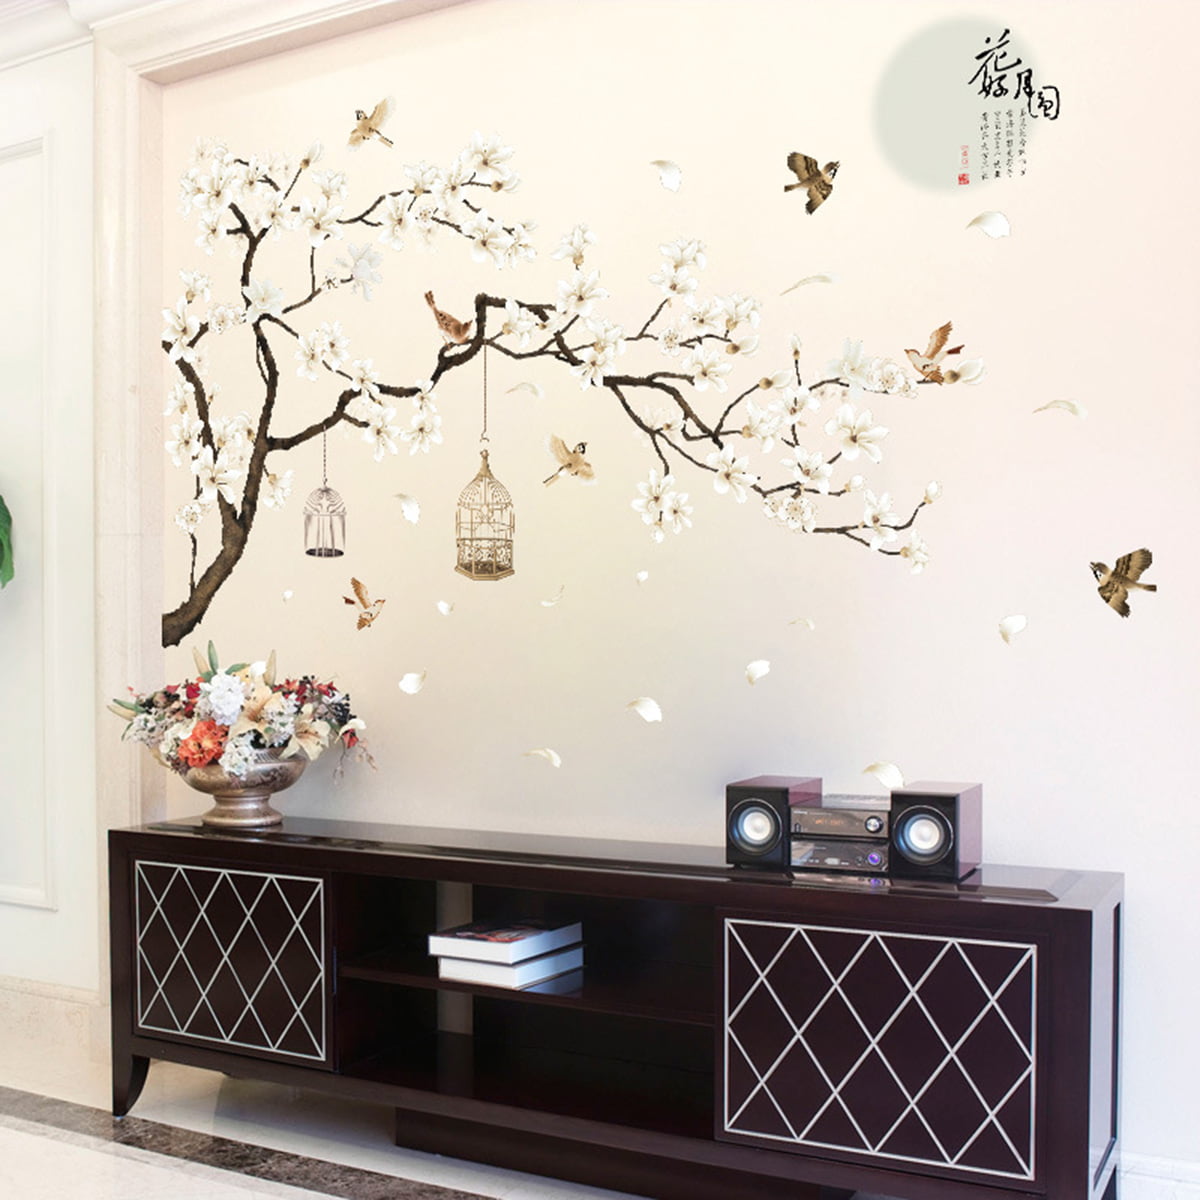 Amaonm Chinese Style Yellow Flowers Brown Tree and Flying Birds Moon Wall Stickers Removable DIY Wall Art Decor Decals Murals for Offices Home Walls Bedroom Study Room Wall Decaorations